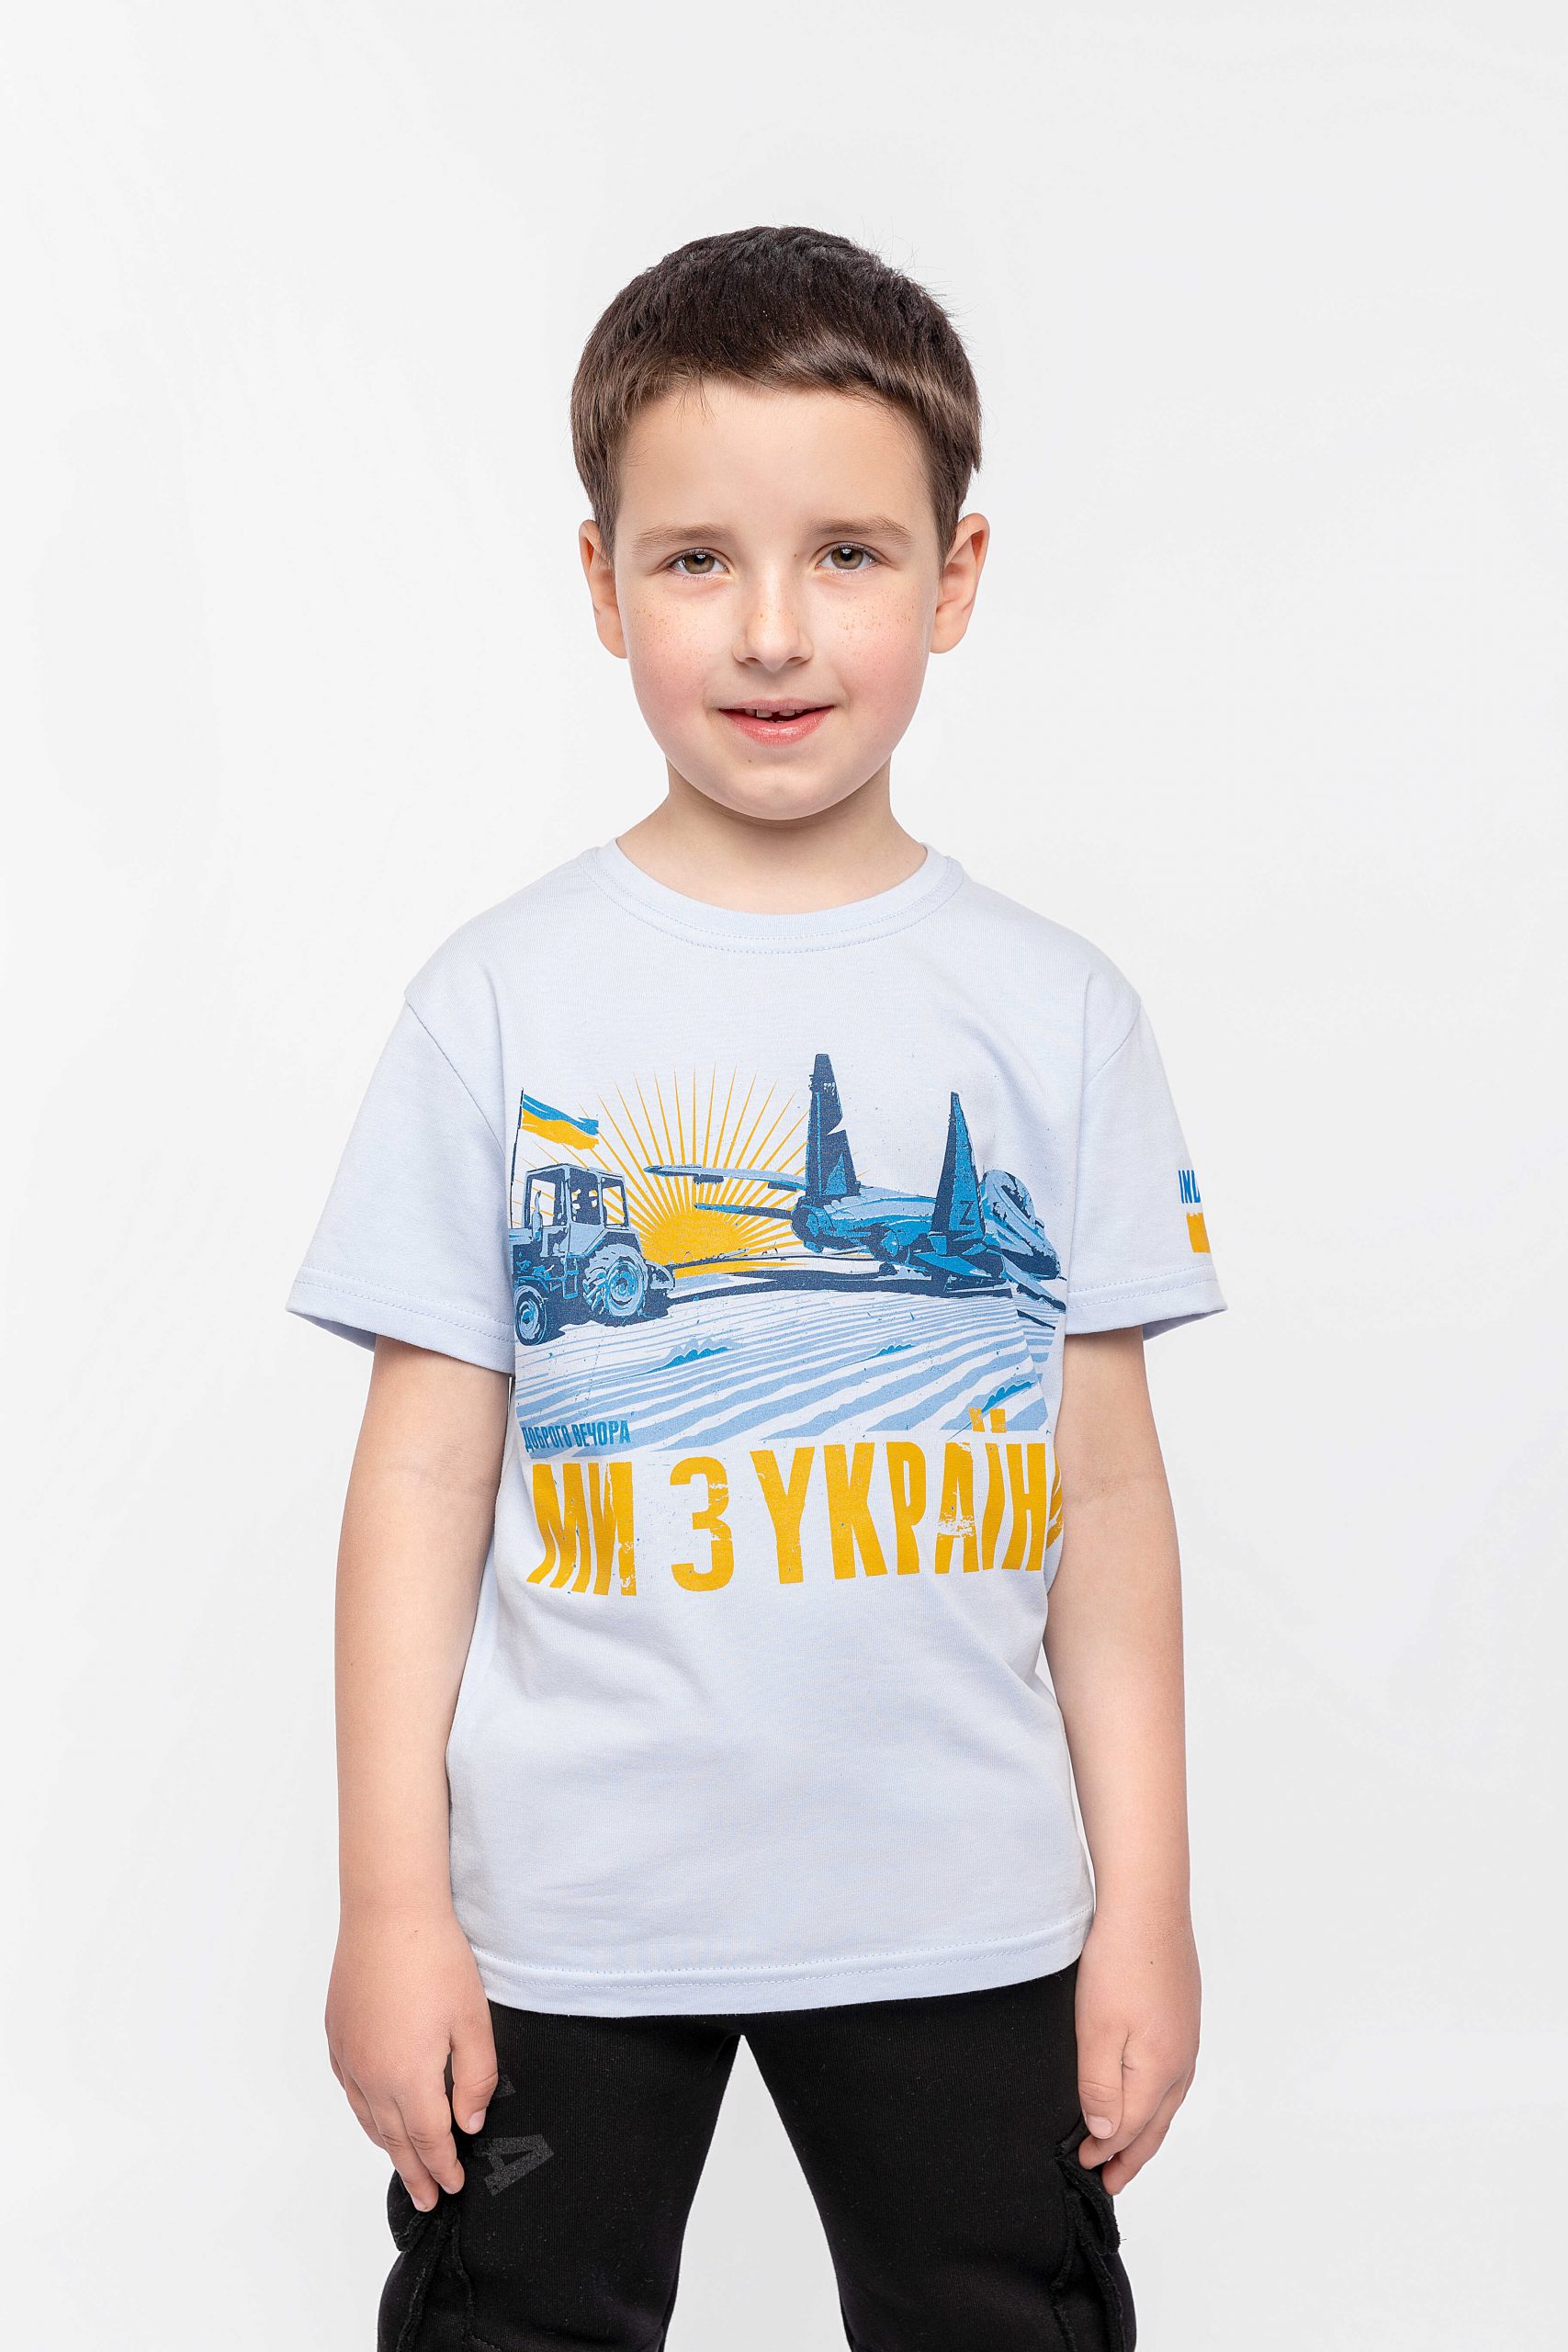 Kids T-Shirt We Are From Ukraine.a. Color light blue. 2.